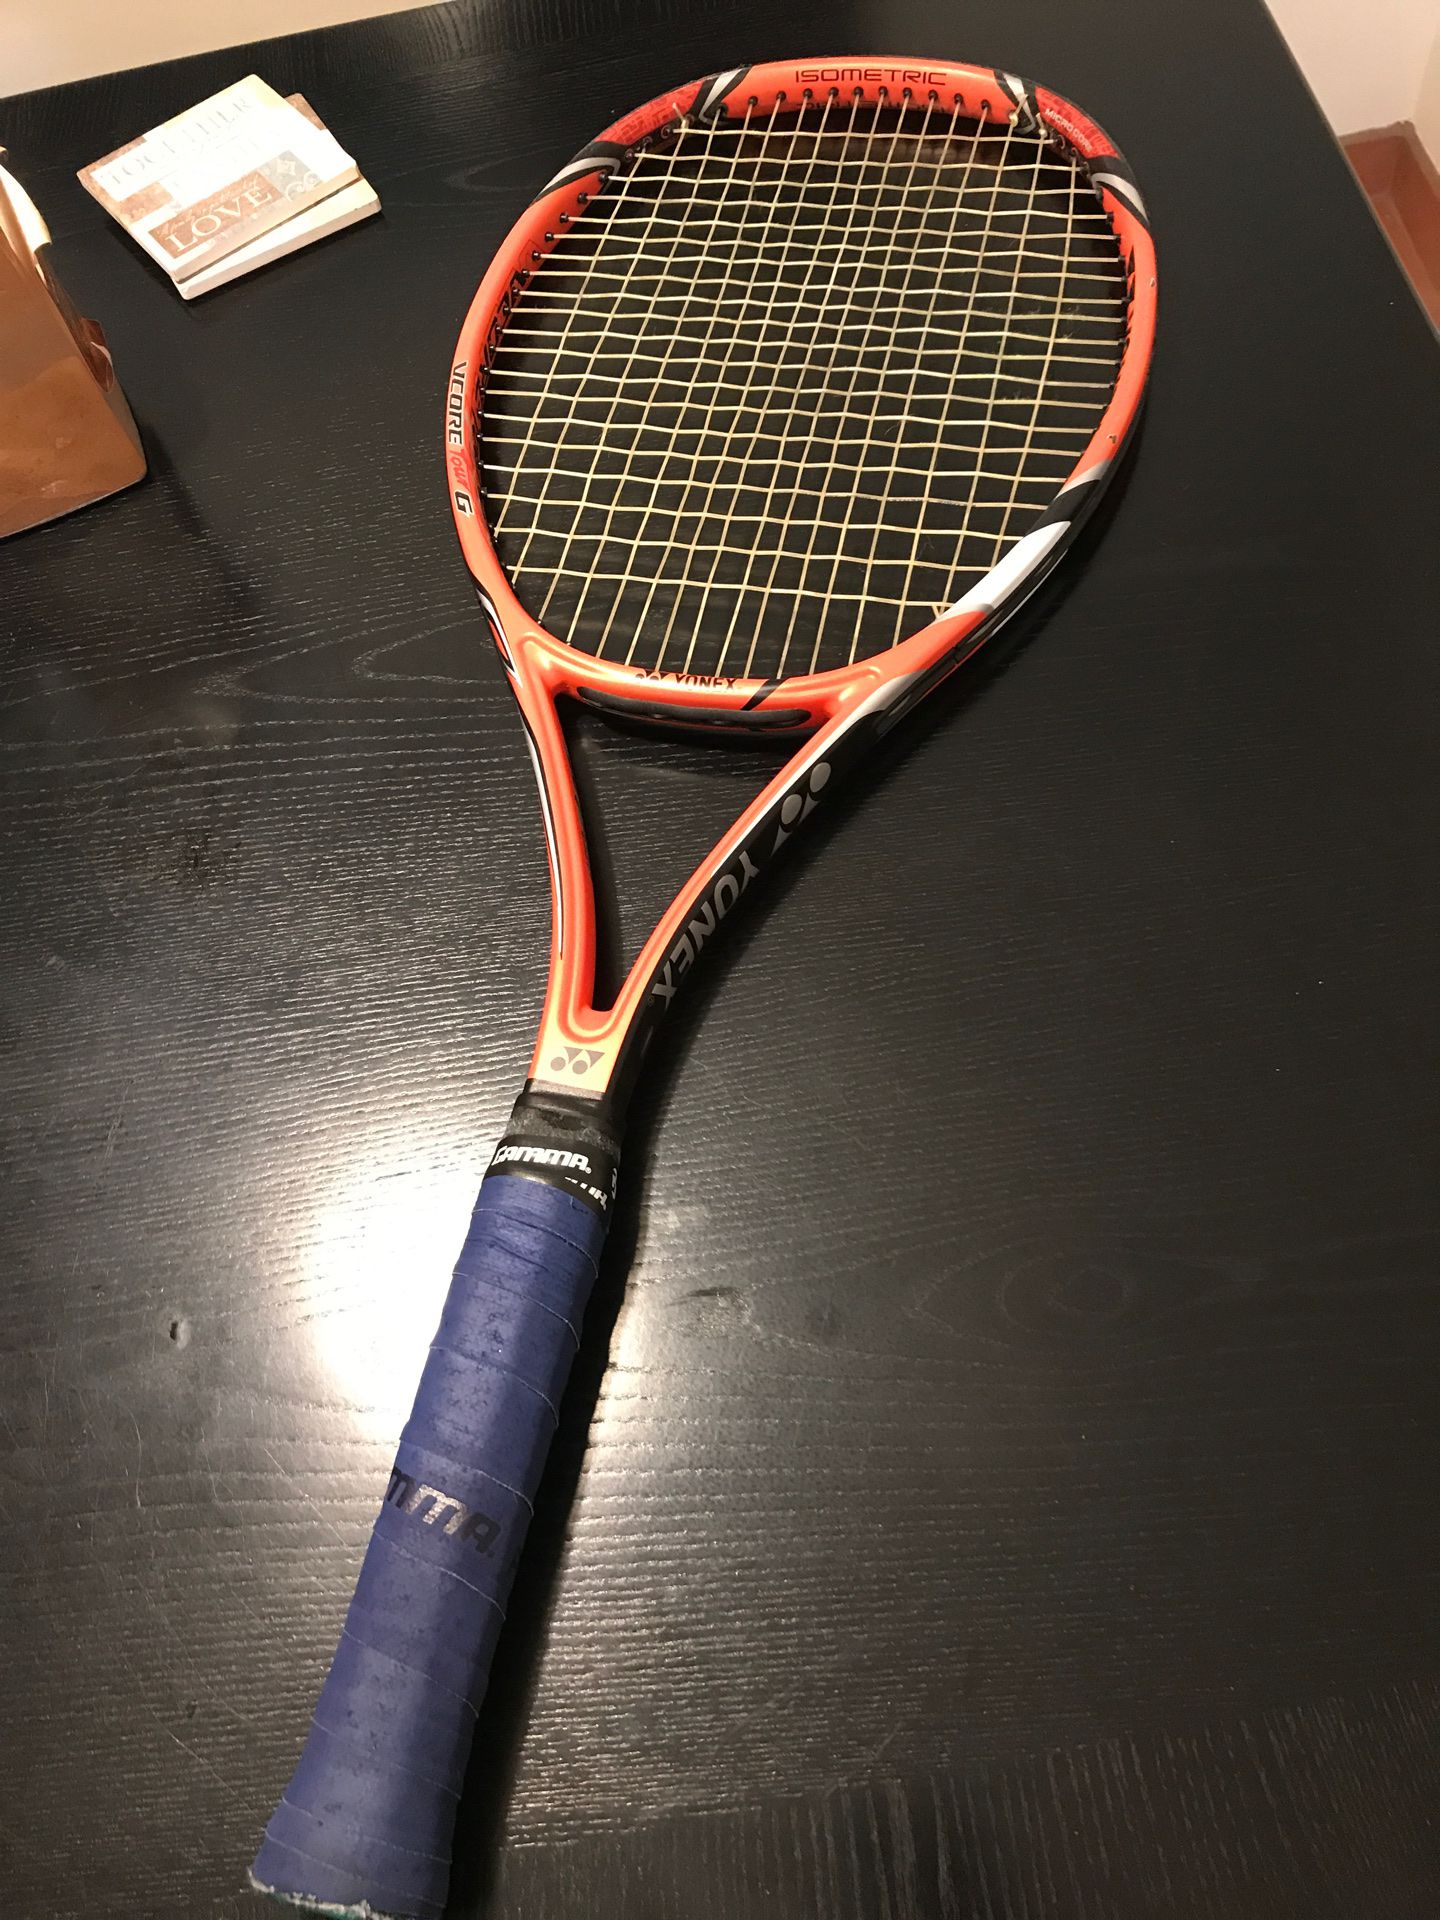 Yonex tennis rackets. 3 in total for 45$ EACH. Used in great shape